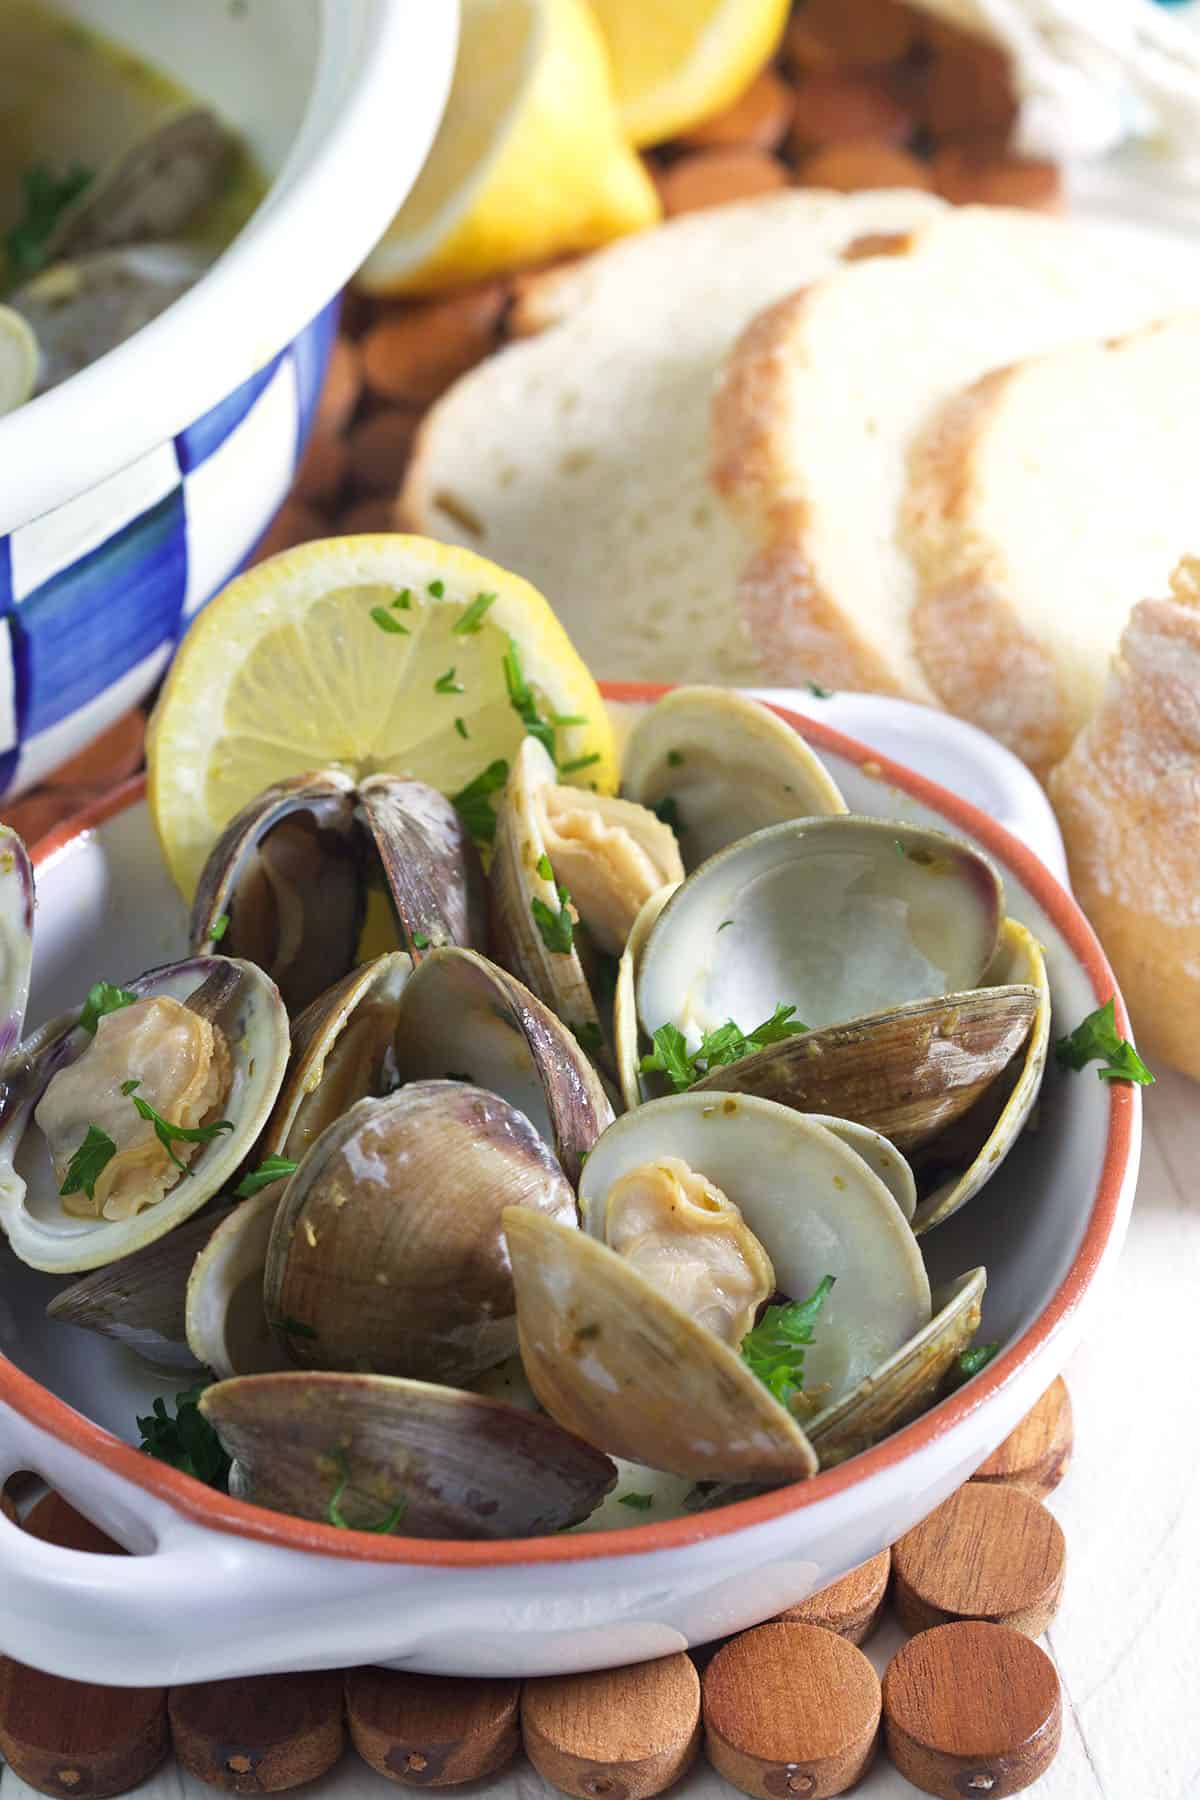 Slices of bread are placed next to a bowl of steamed clams.